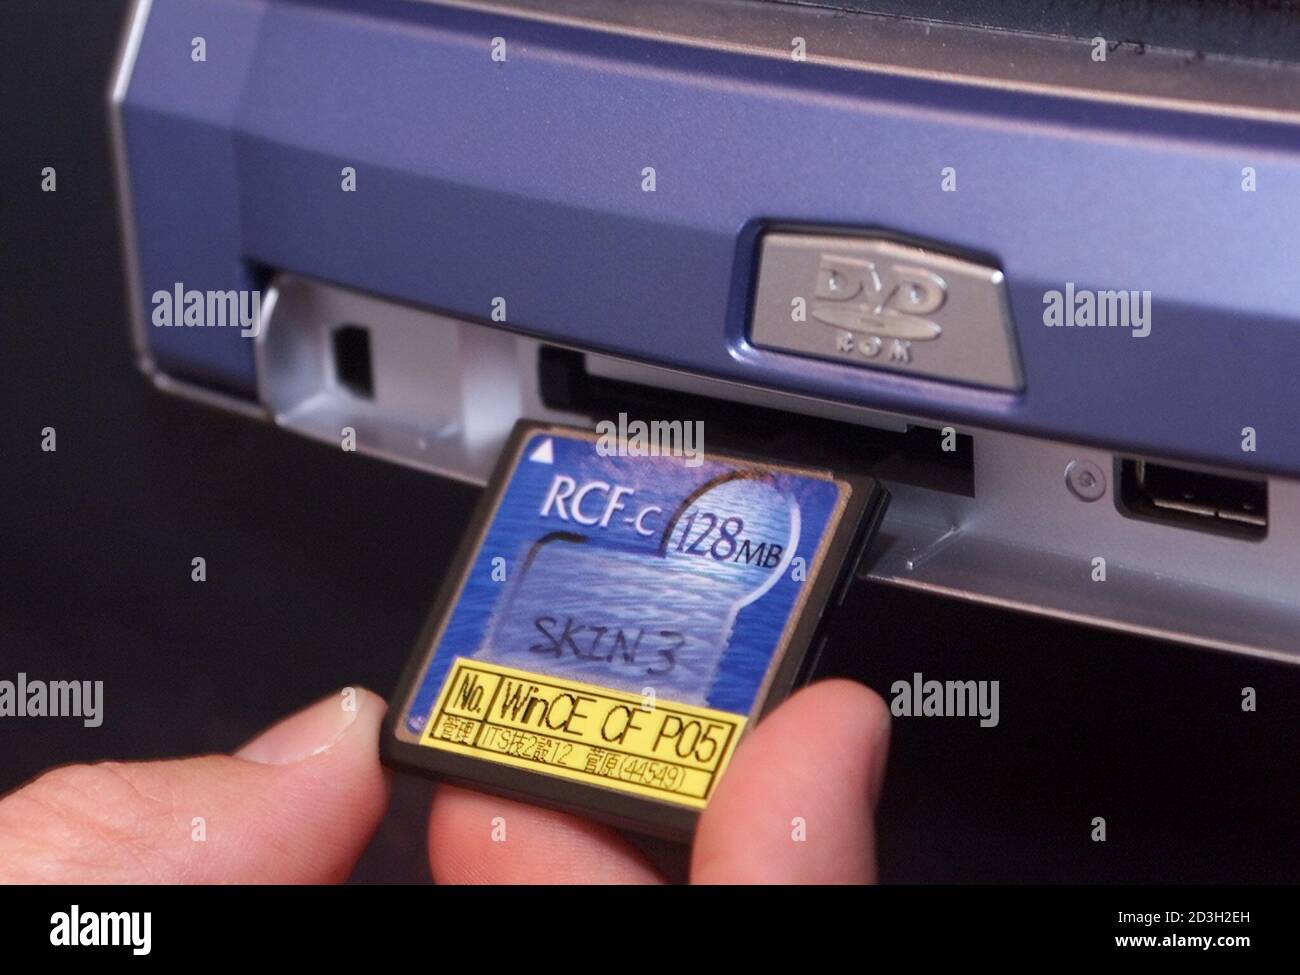 Jeff Murdock of Denso, inserts a flash memory card into a in-dash Windows  CE Navigation system during the Consumer Electronics Show January 7, 2001  in Las Vegas. The product, which should be